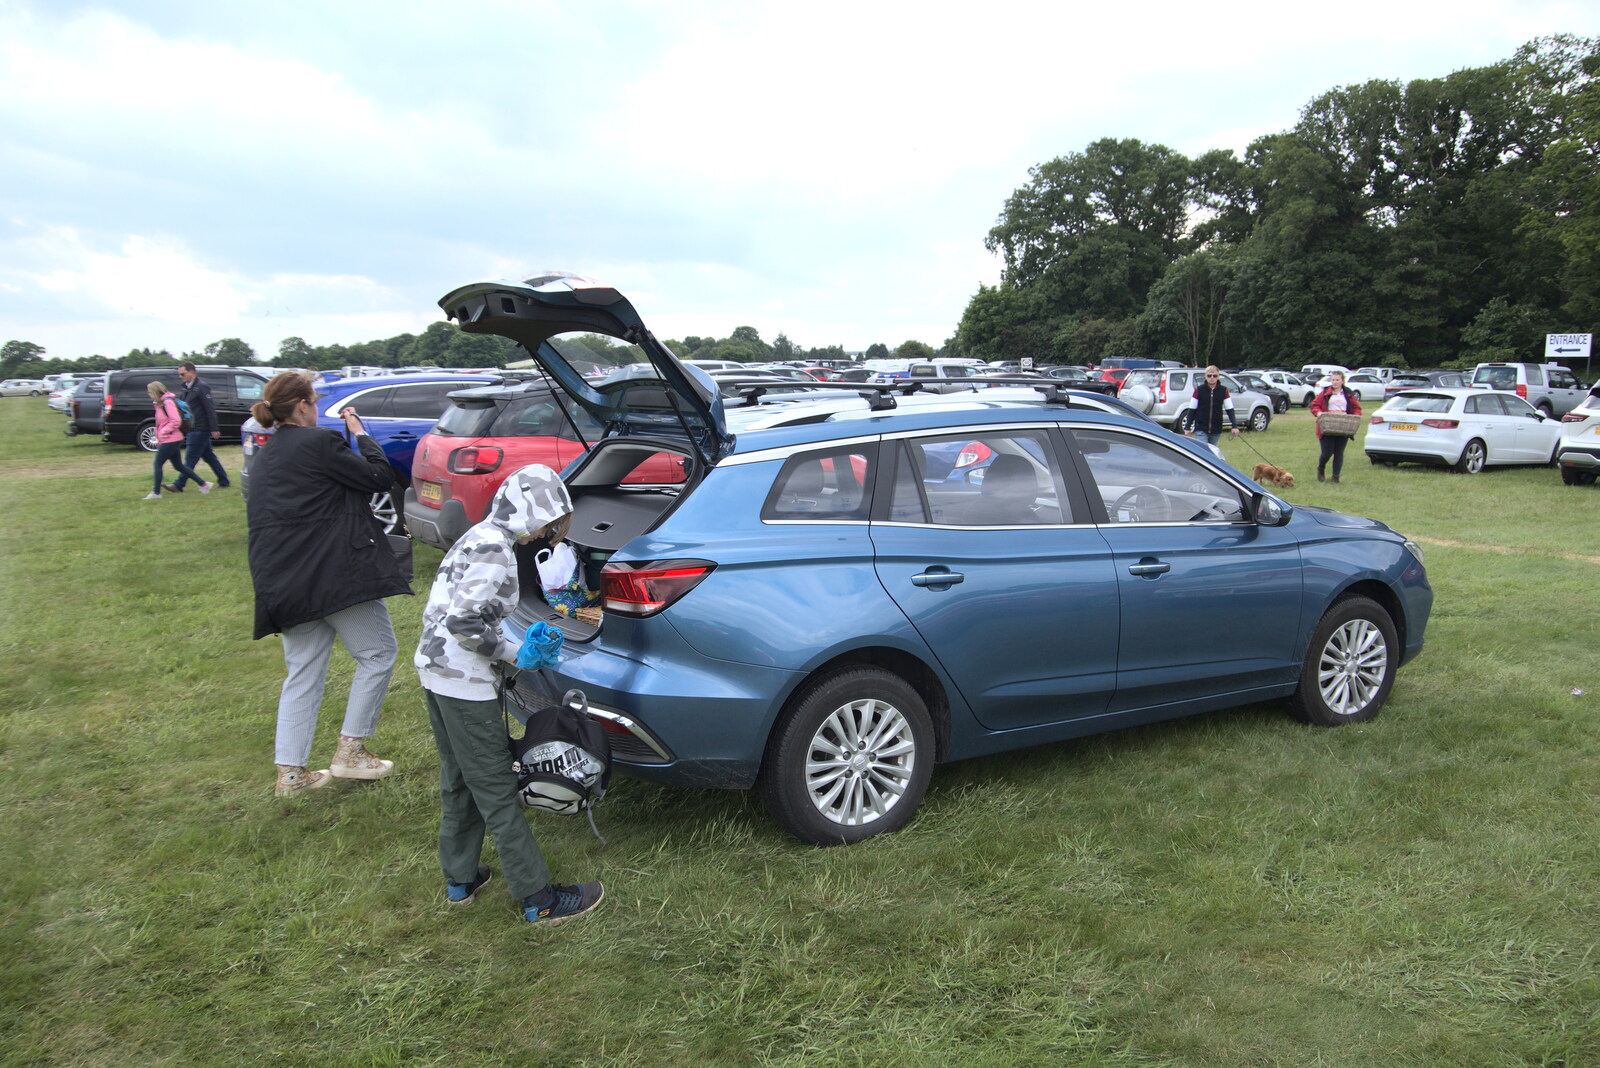 The Suffolk Show, Trinity Park, Ipswich - 1st June 2022: We're back at the car